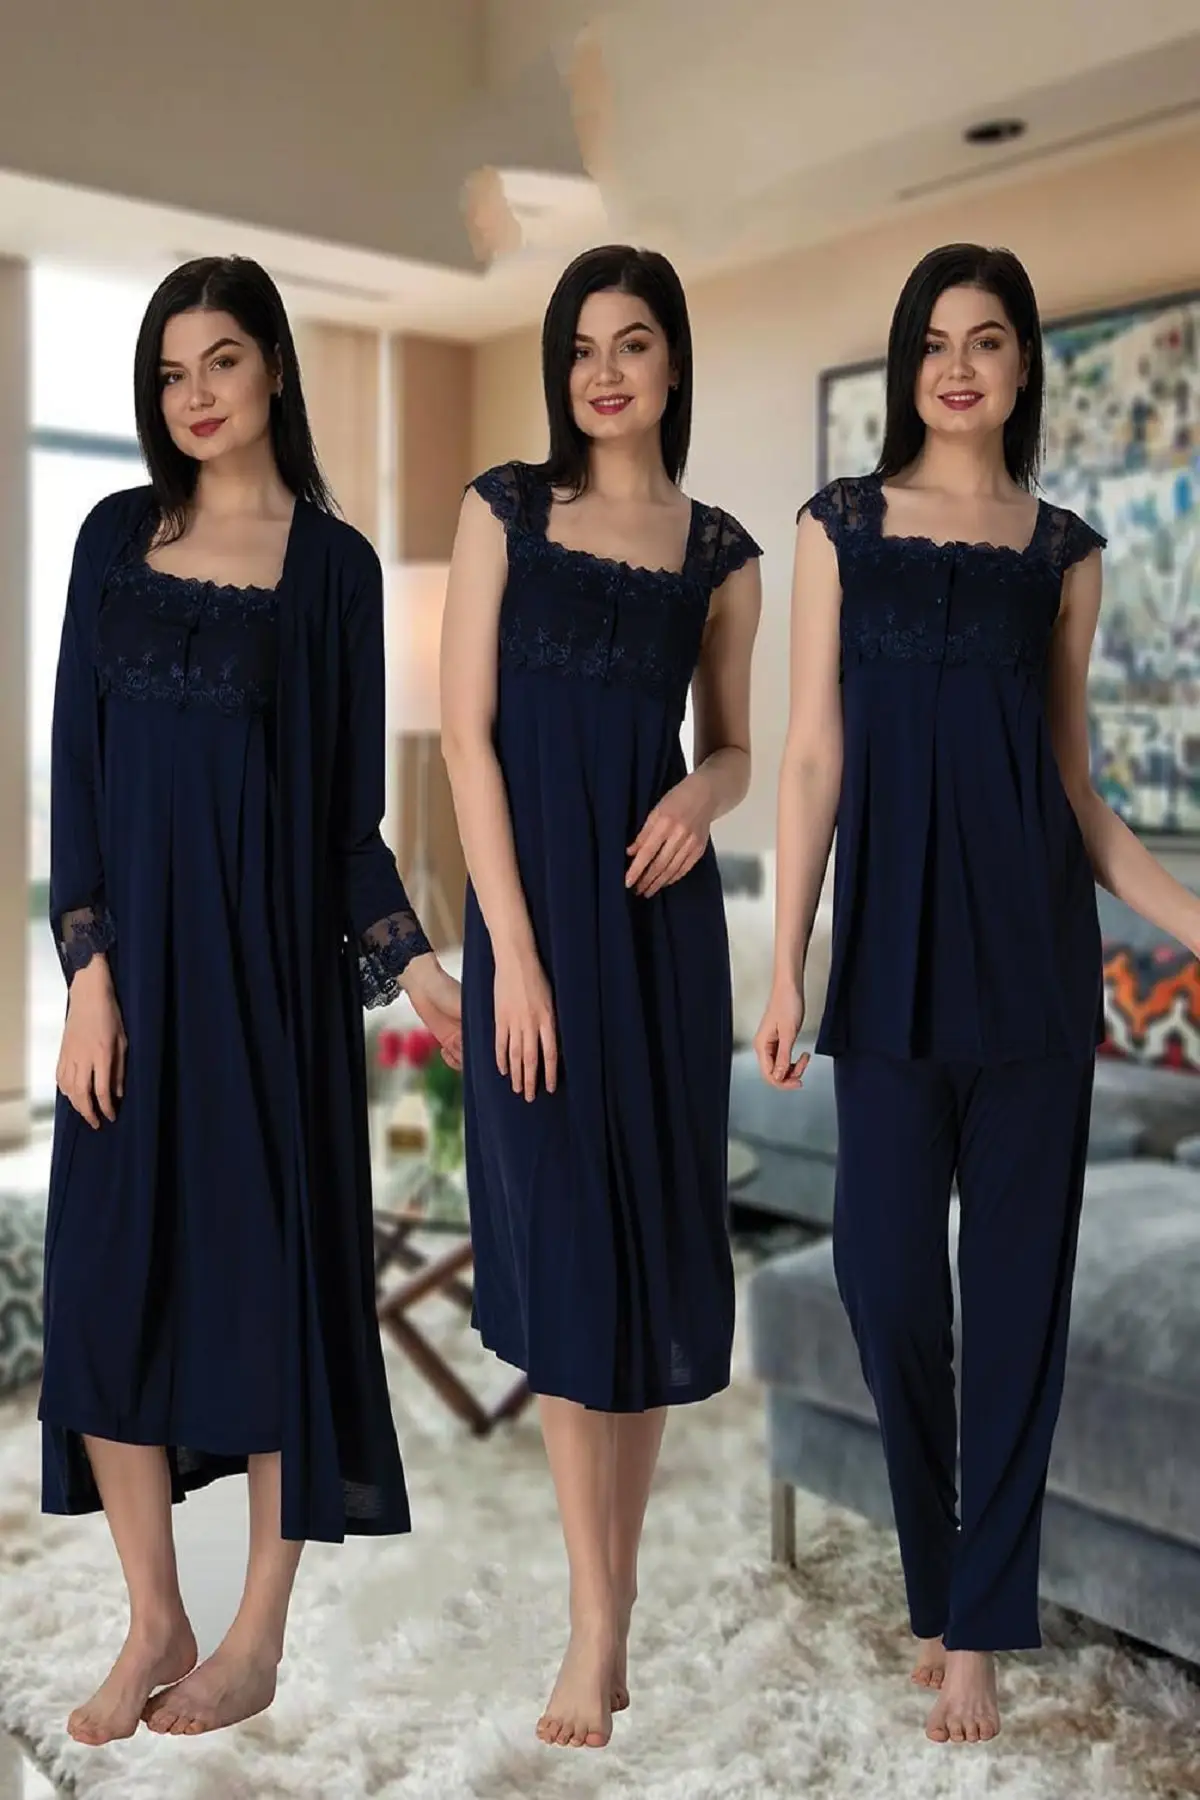 Effort Pajamas Women Pajamas Nightgown Dressing Gown Maternity Maternity 4 Pieces Red Gray Ecru Navy Blue enlarge